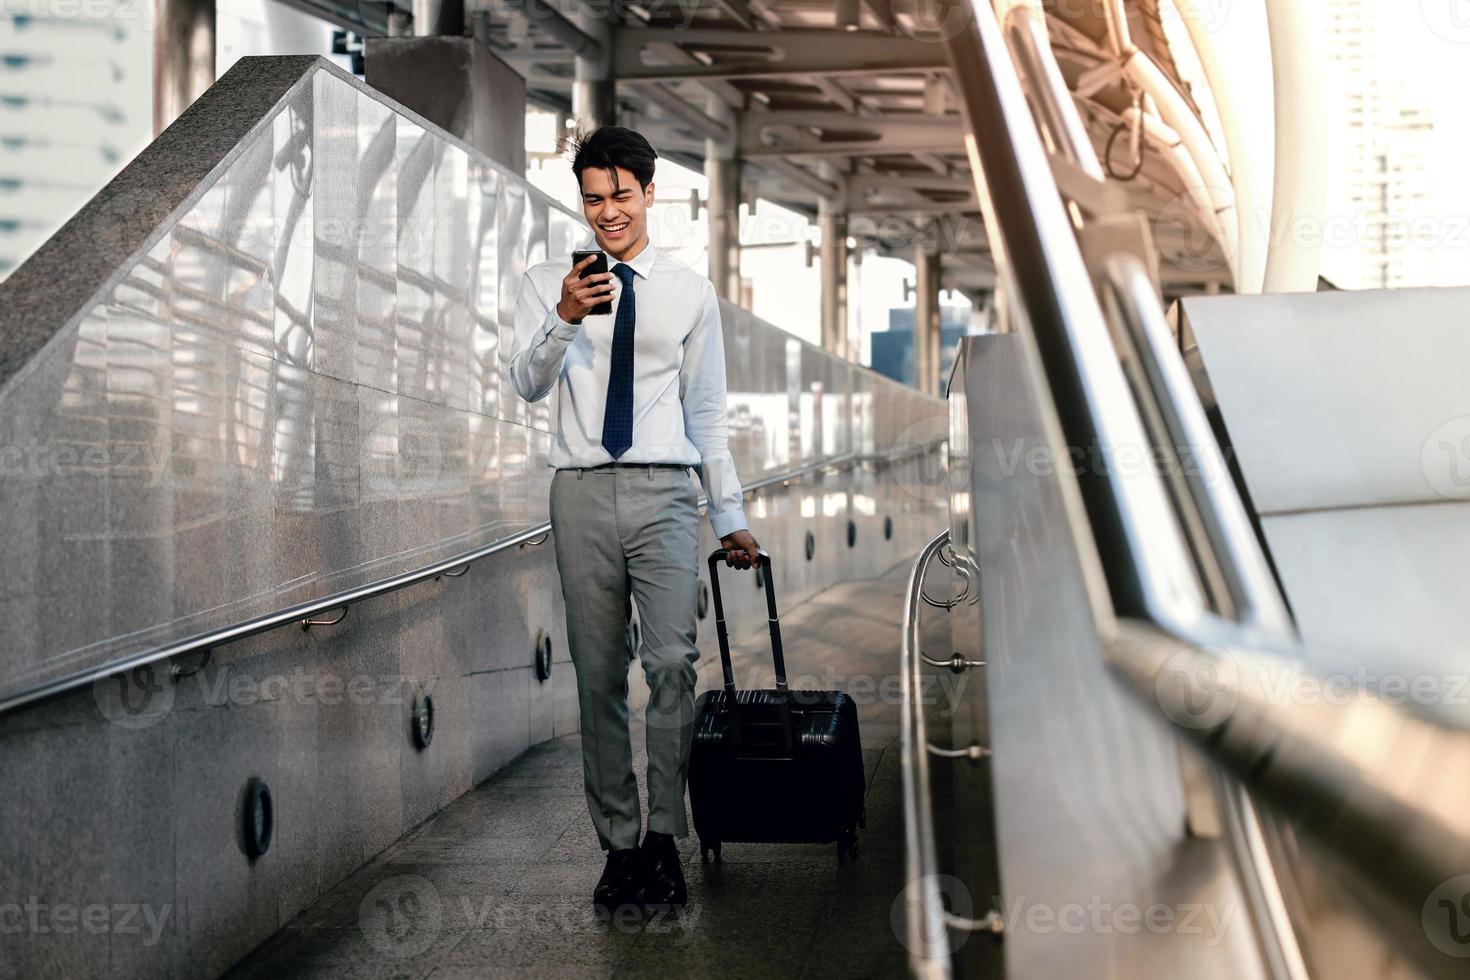 Smiling  Passenger Businessman Using Mobile Phone while Walking with Suitcase in the Airport or Public Transportation Station. Lifestyle of Modern People. Full Length photo